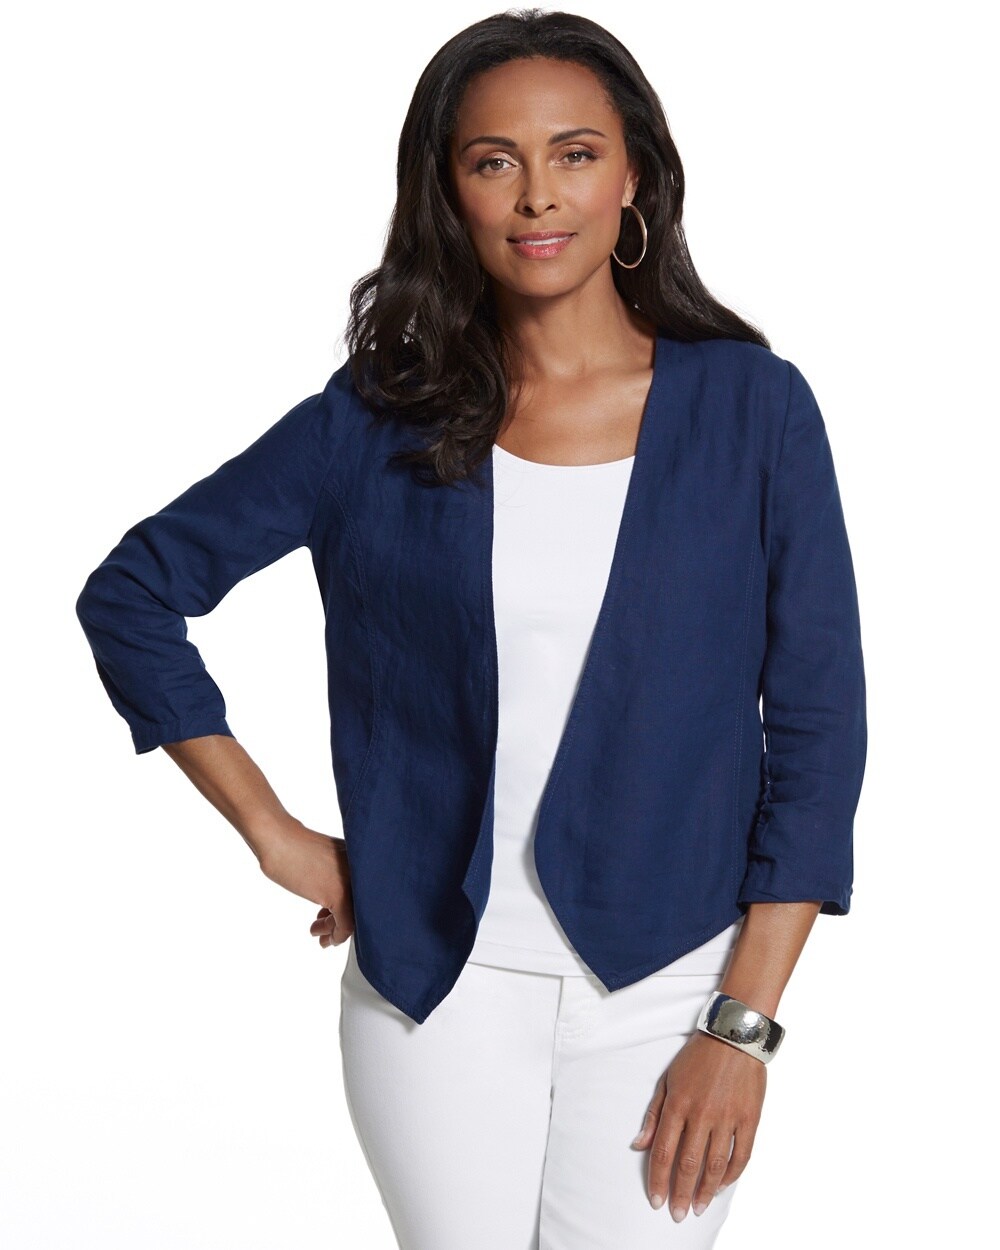 Linen and Lace Jacket - Chico's